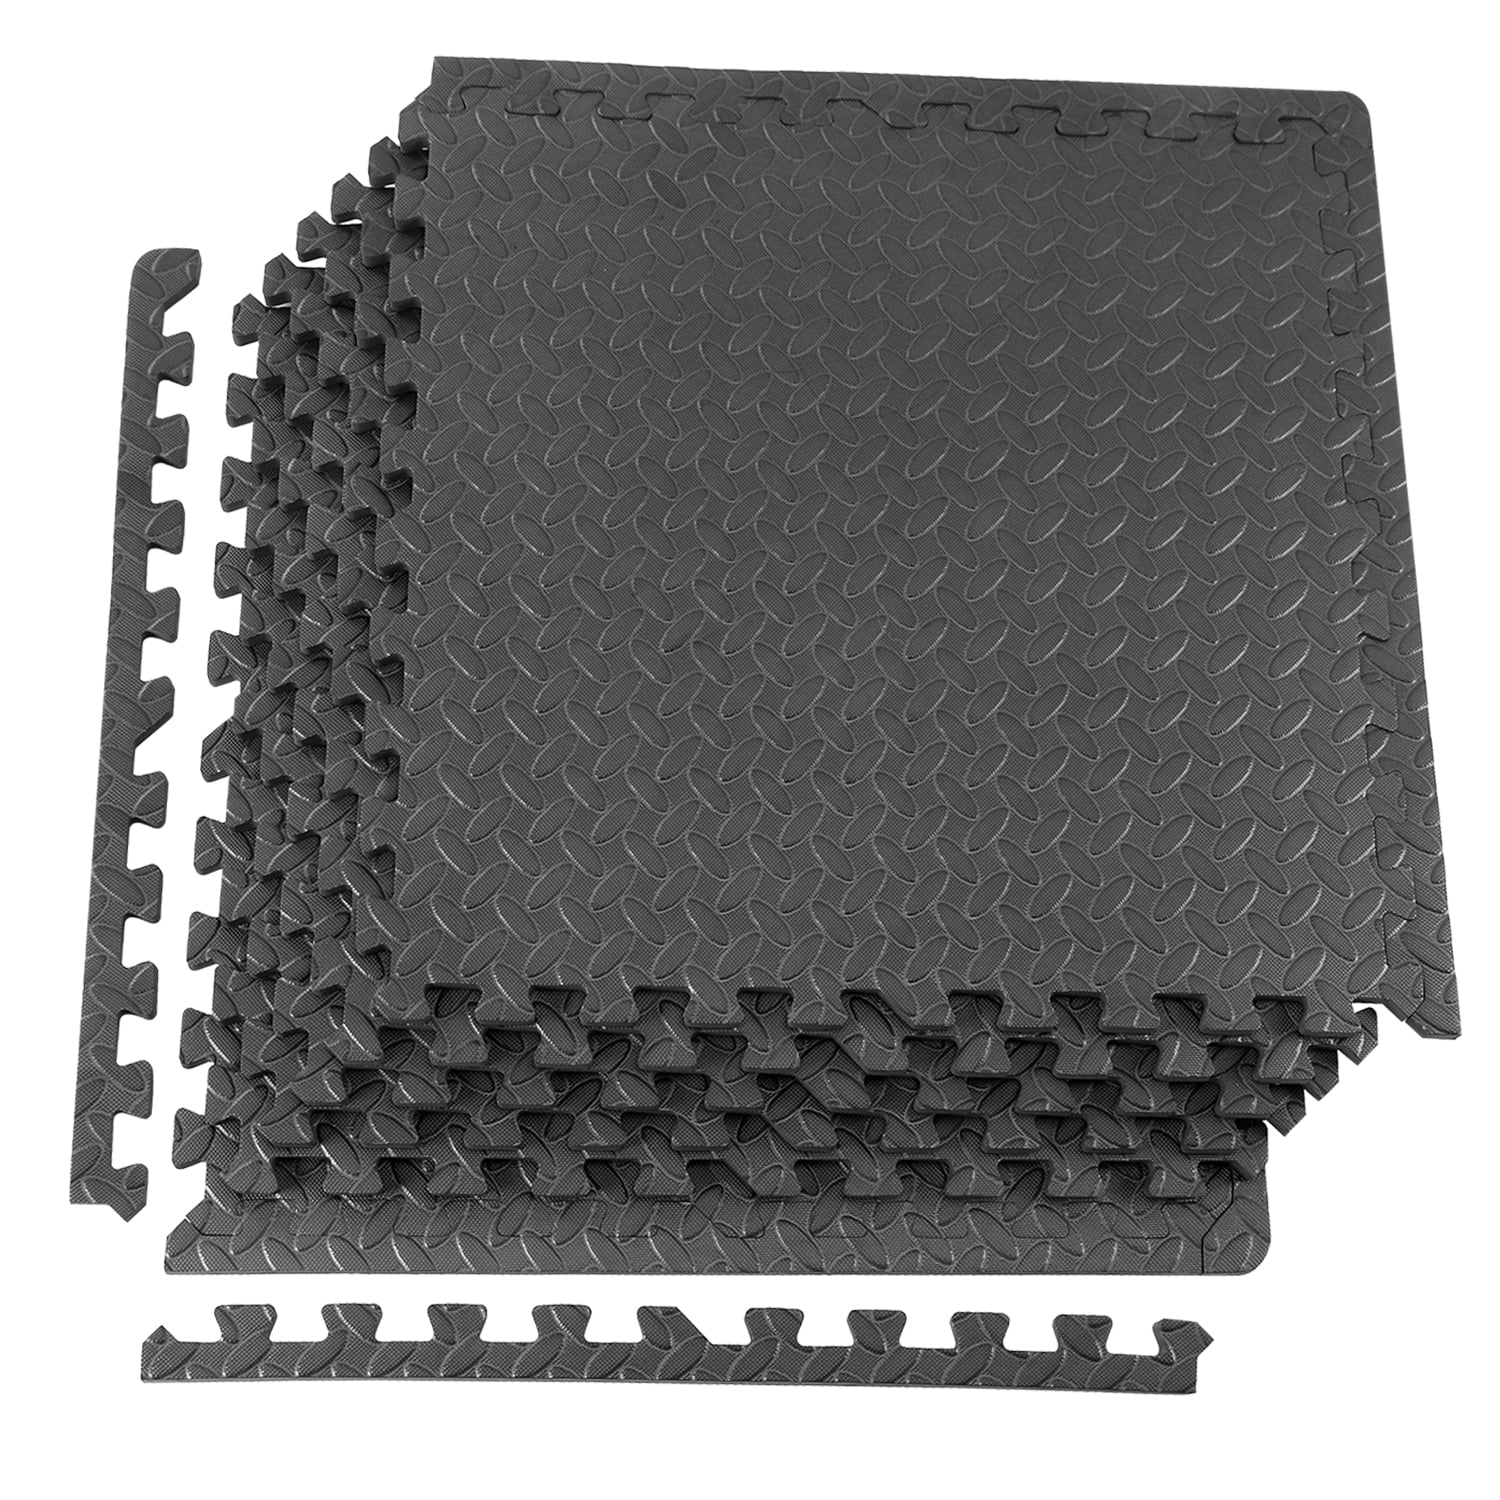 XPRT Fitness 1/2 In. Thick Interlocking Foam Floor Mat Exercise Fitness  Equipment Mat, 48 Sq Ft. 12 Pieces 